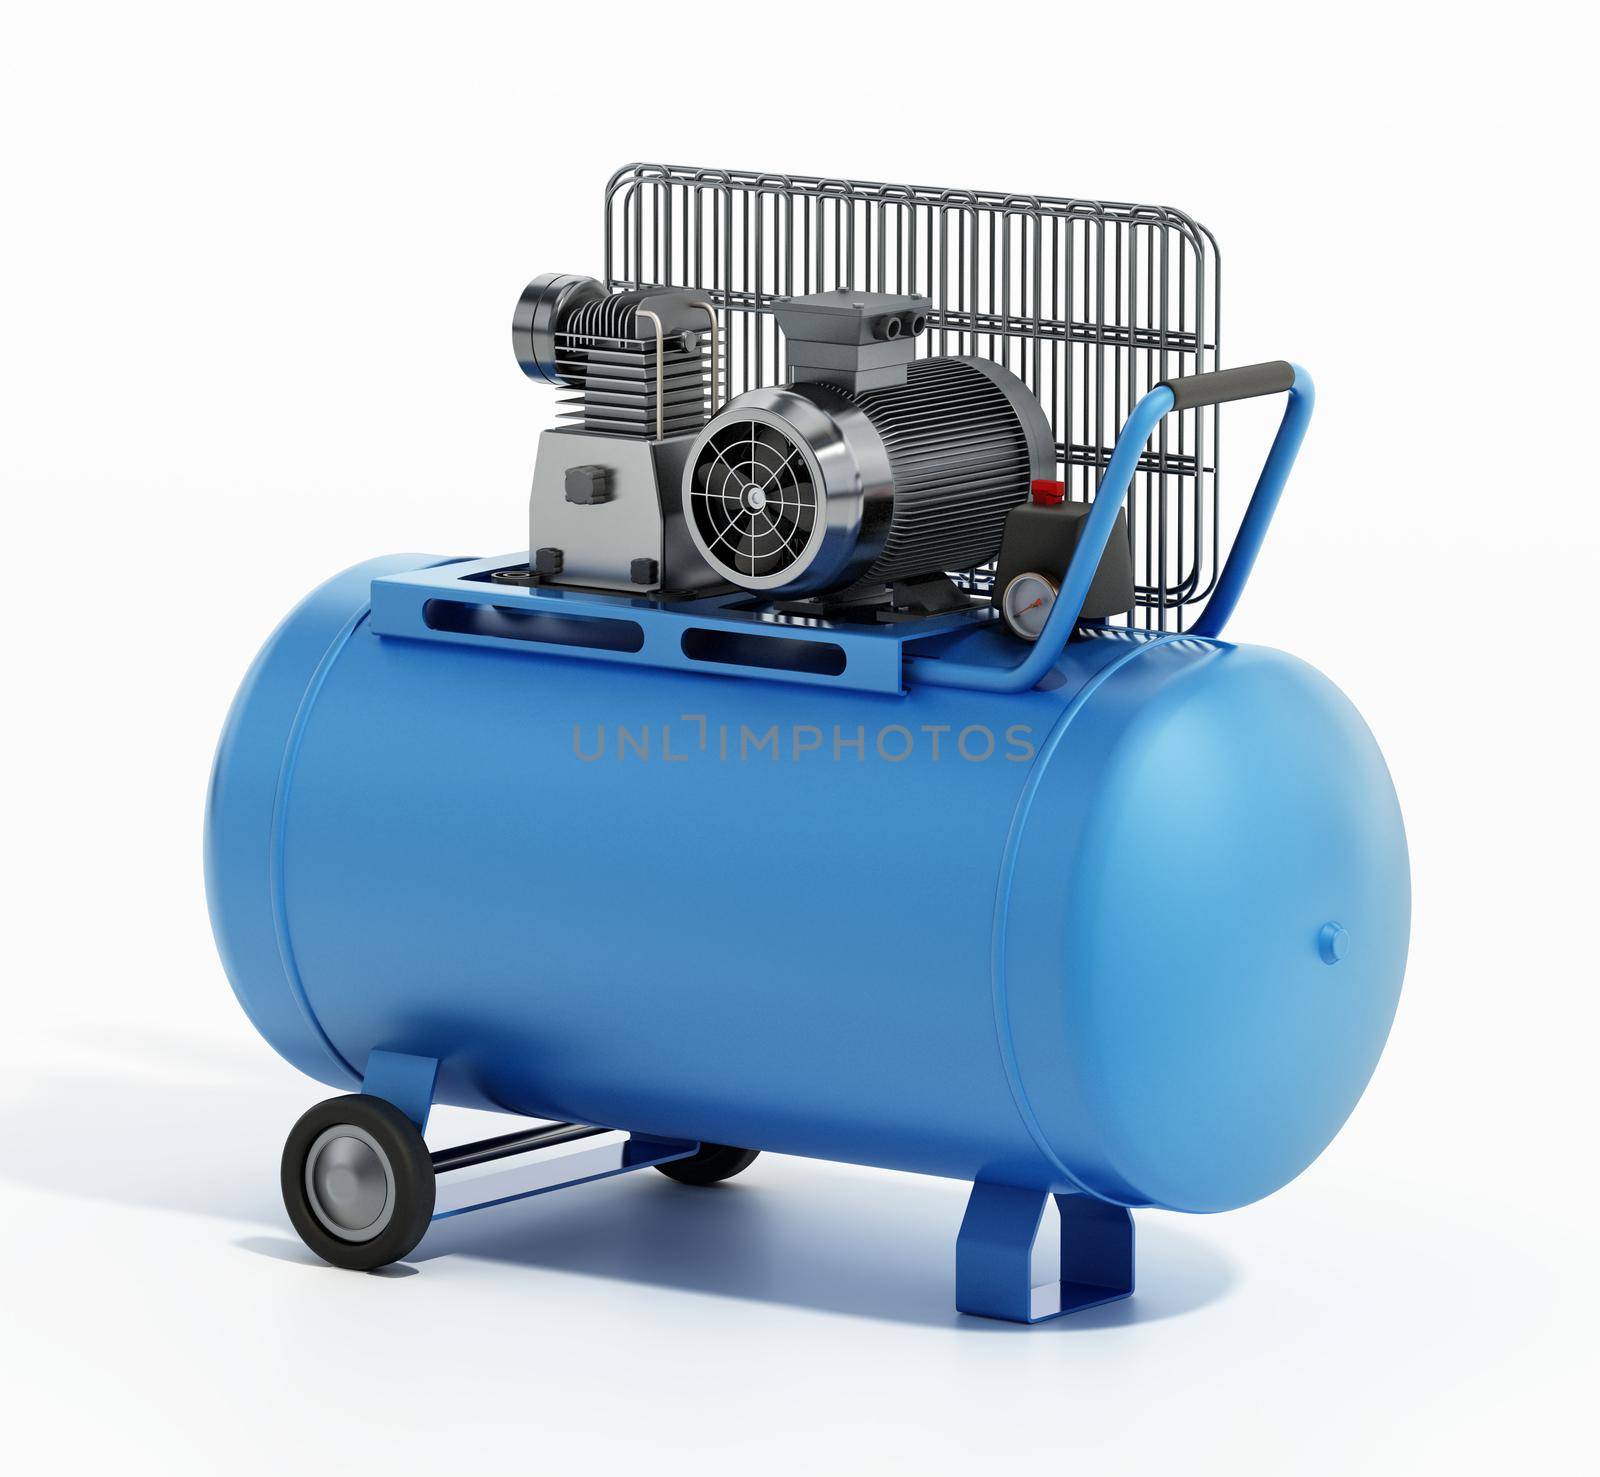 Air compressor isolated on white background. 3D illustration.